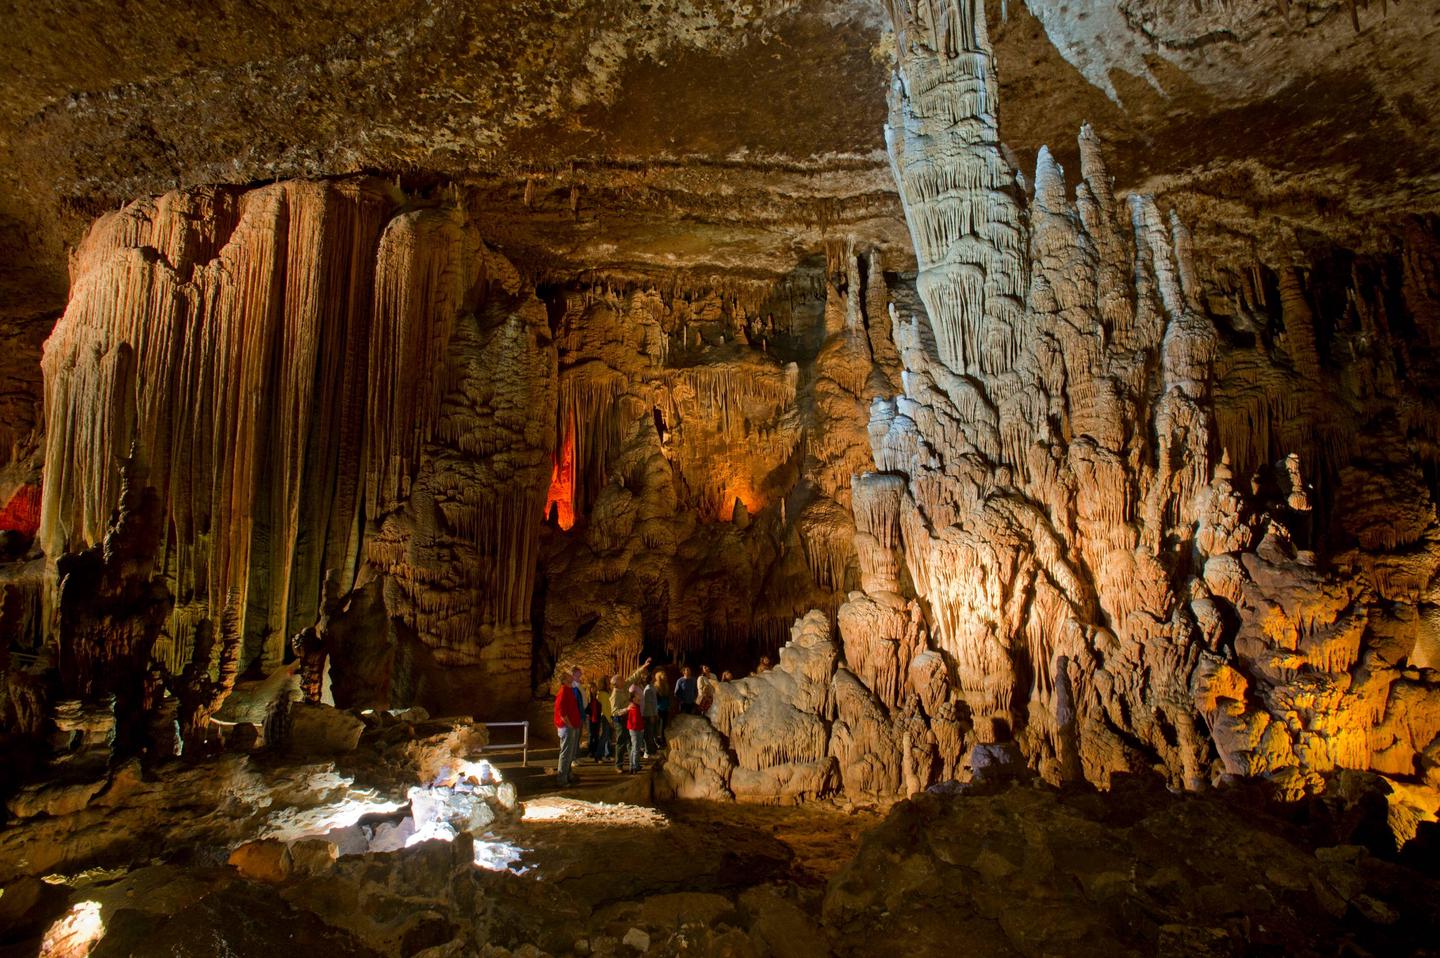 Preview photo of Blanchard Springs Caverns